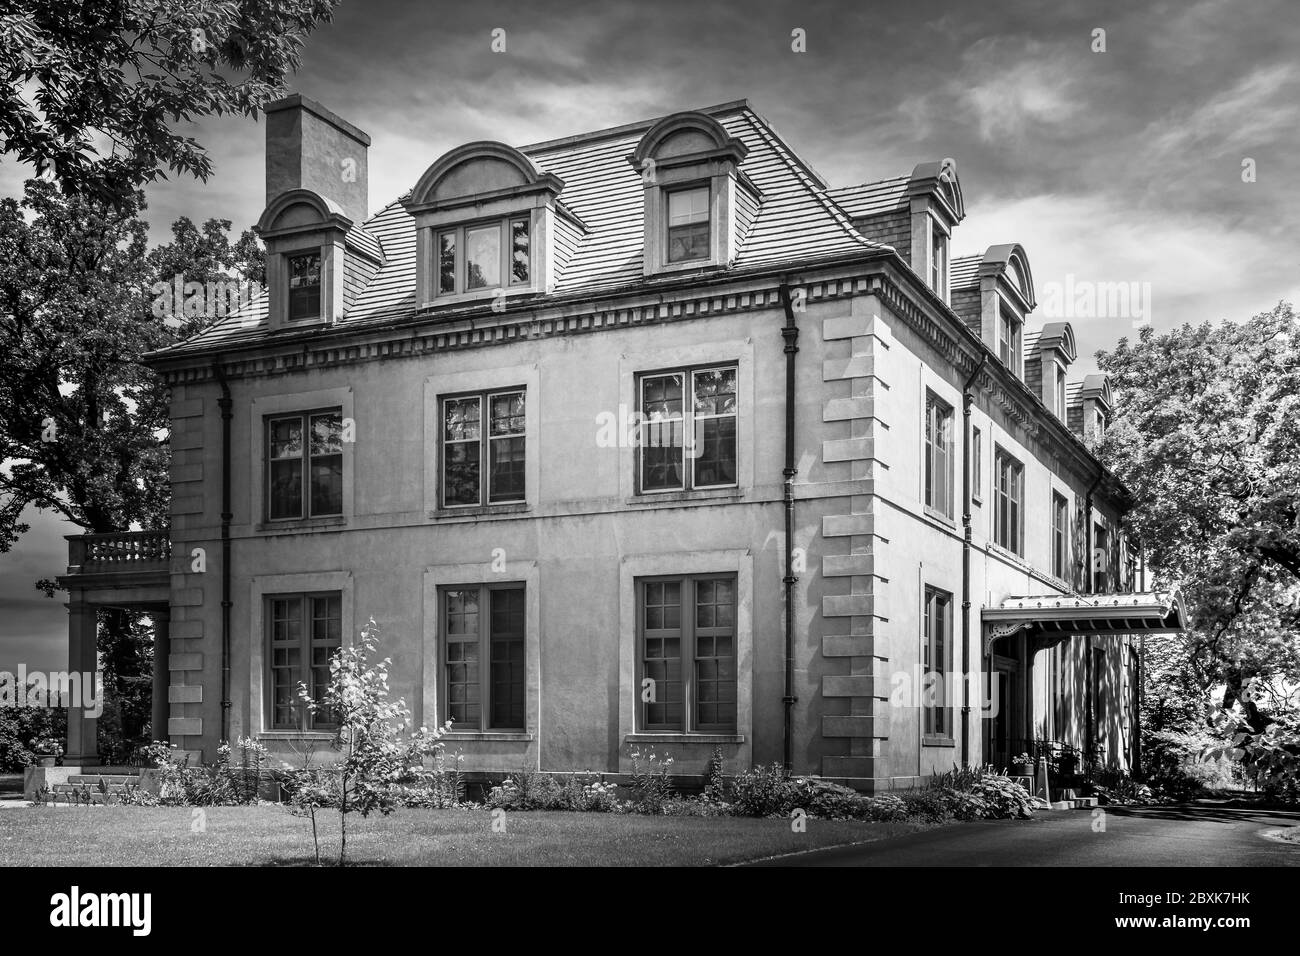 An impressive Beaux Arts style French villa, with a mansard roof with arched dormer windows in small town America, St. Cloud, MN, USA, in B&W Stock Photo